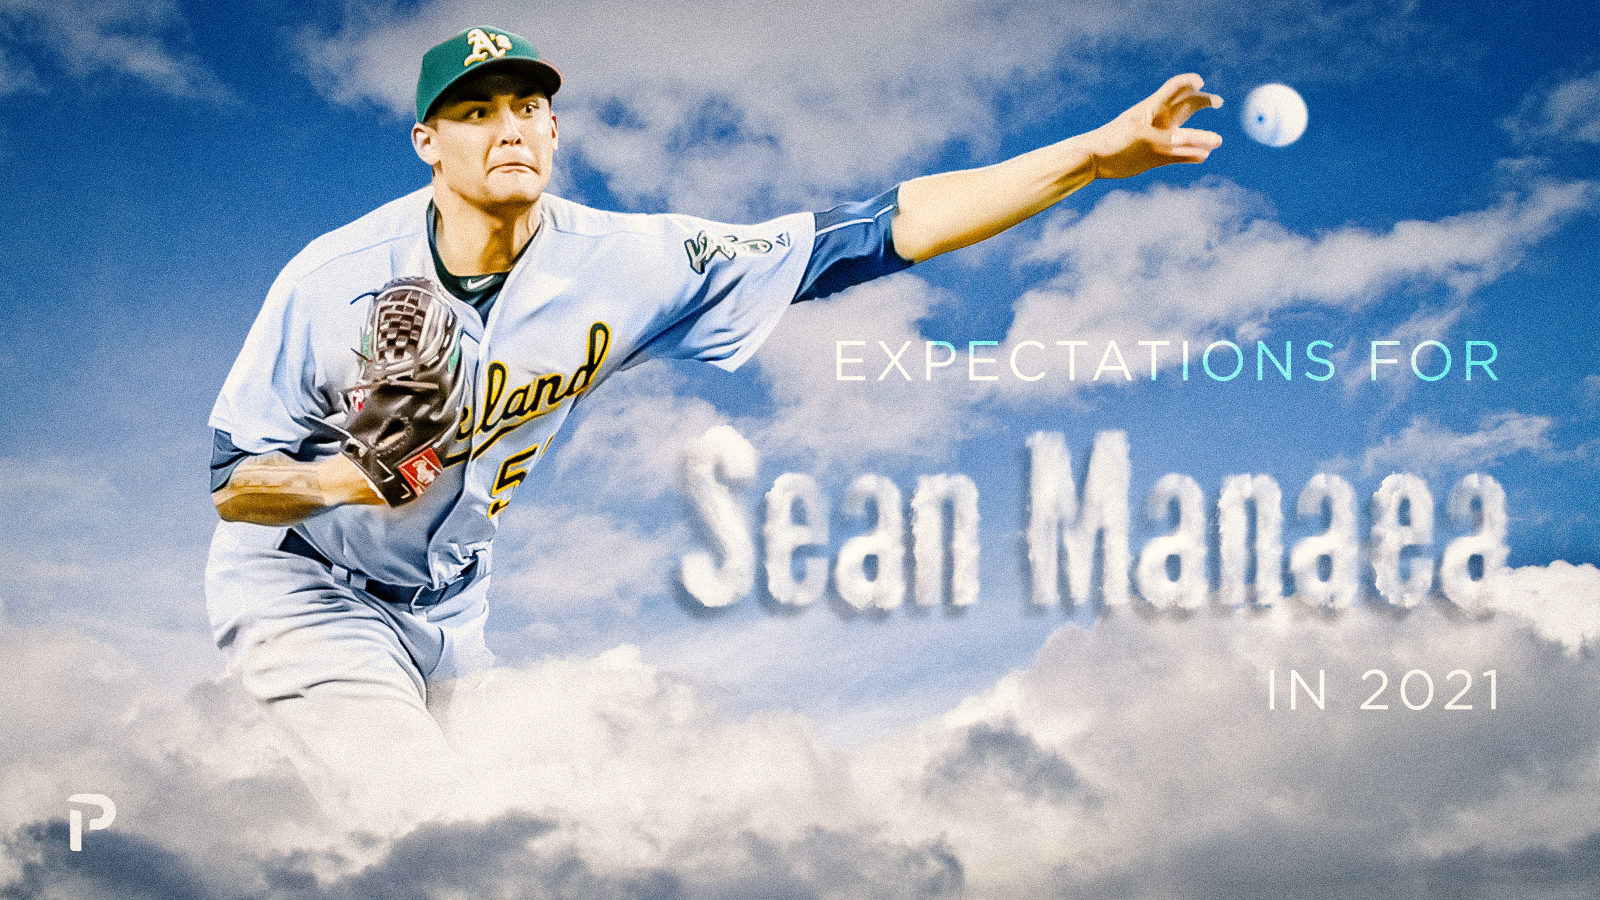 Expectations For Sean Manaea In 2021